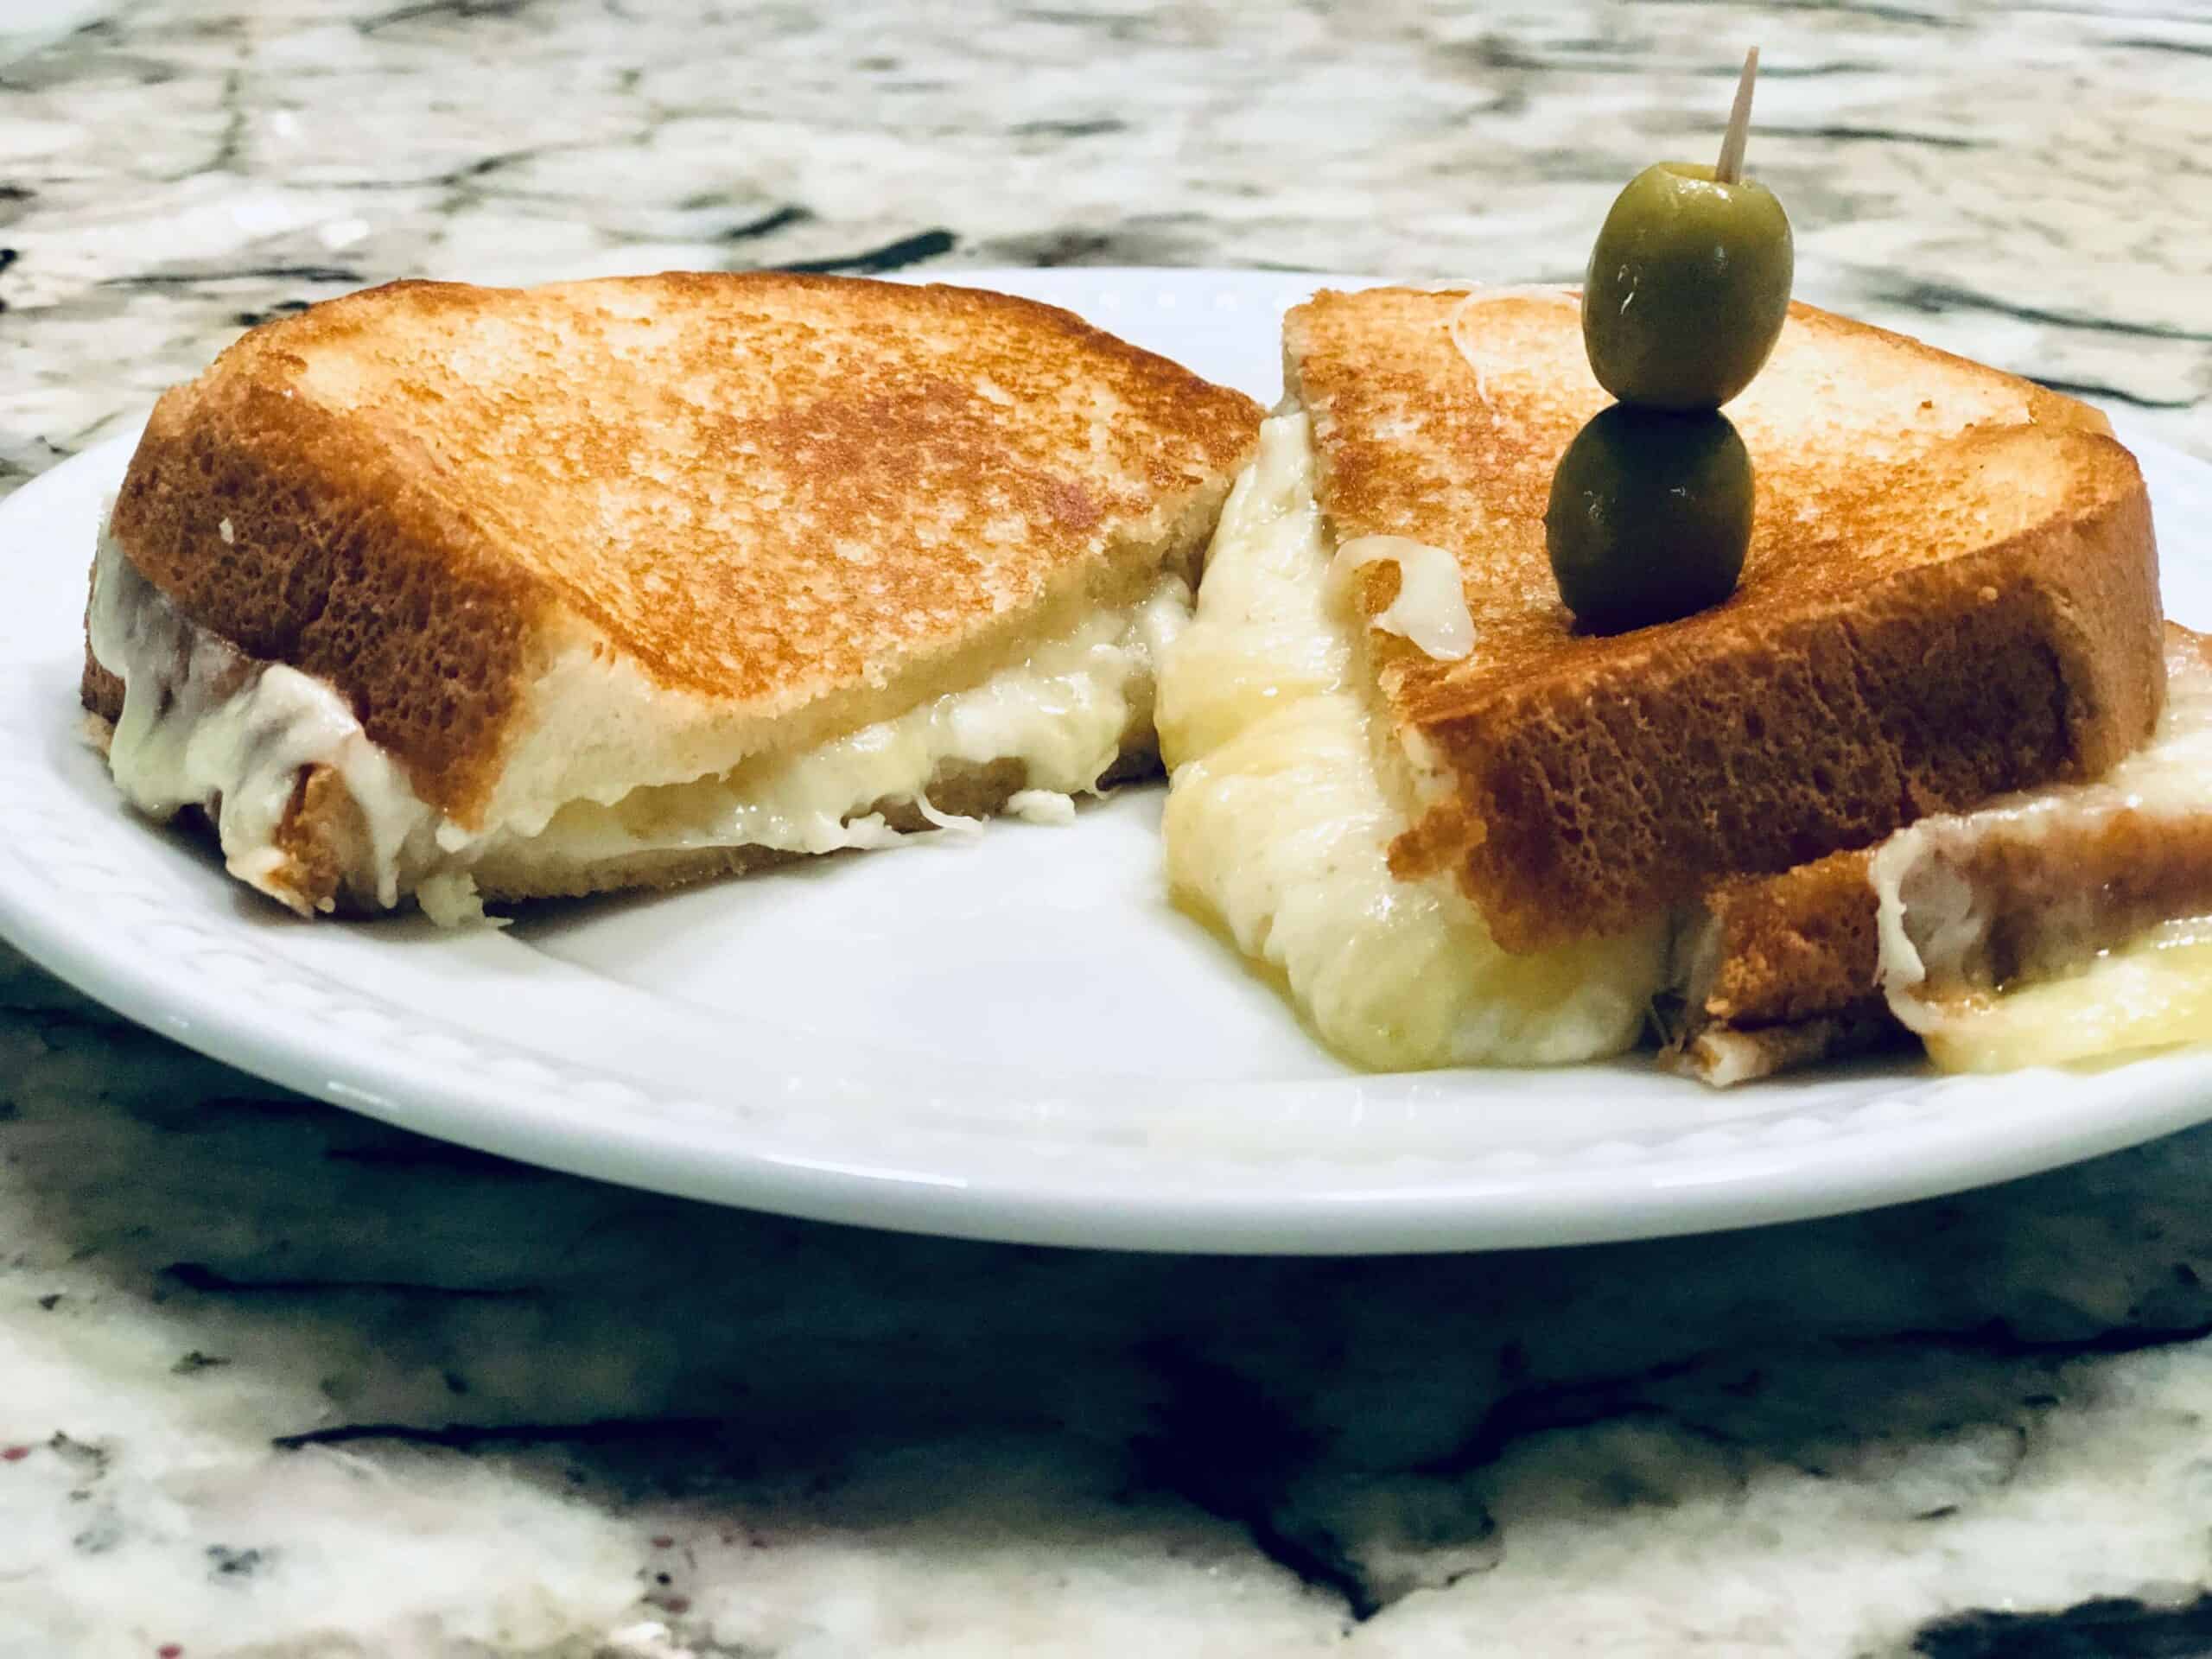 Asiago Grilled Cheese on a plate topped with olives